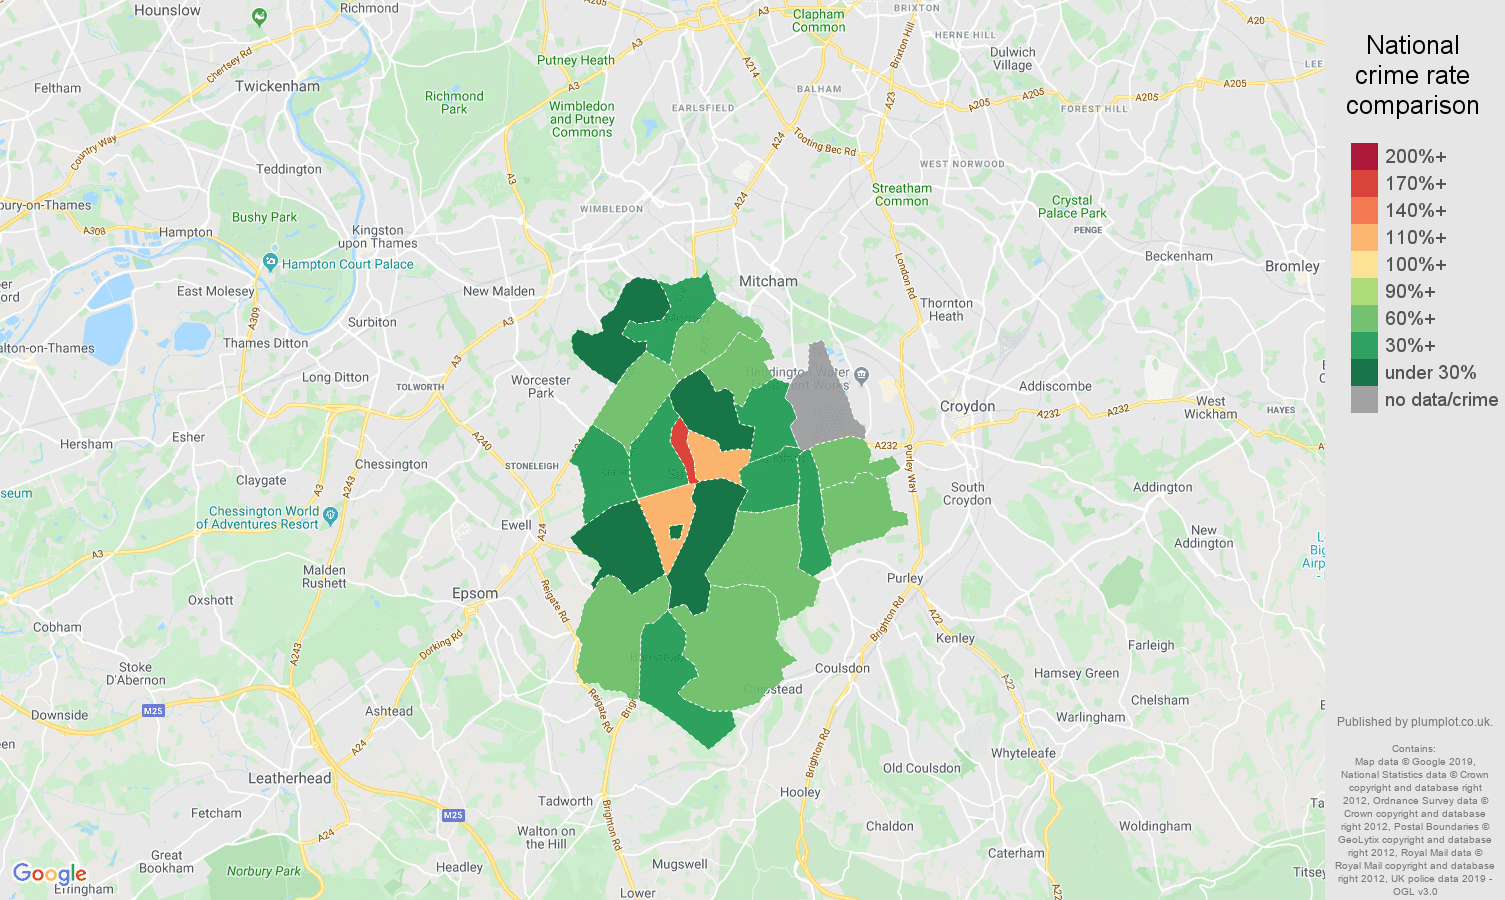 Sutton possession of weapons crime rate comparison map